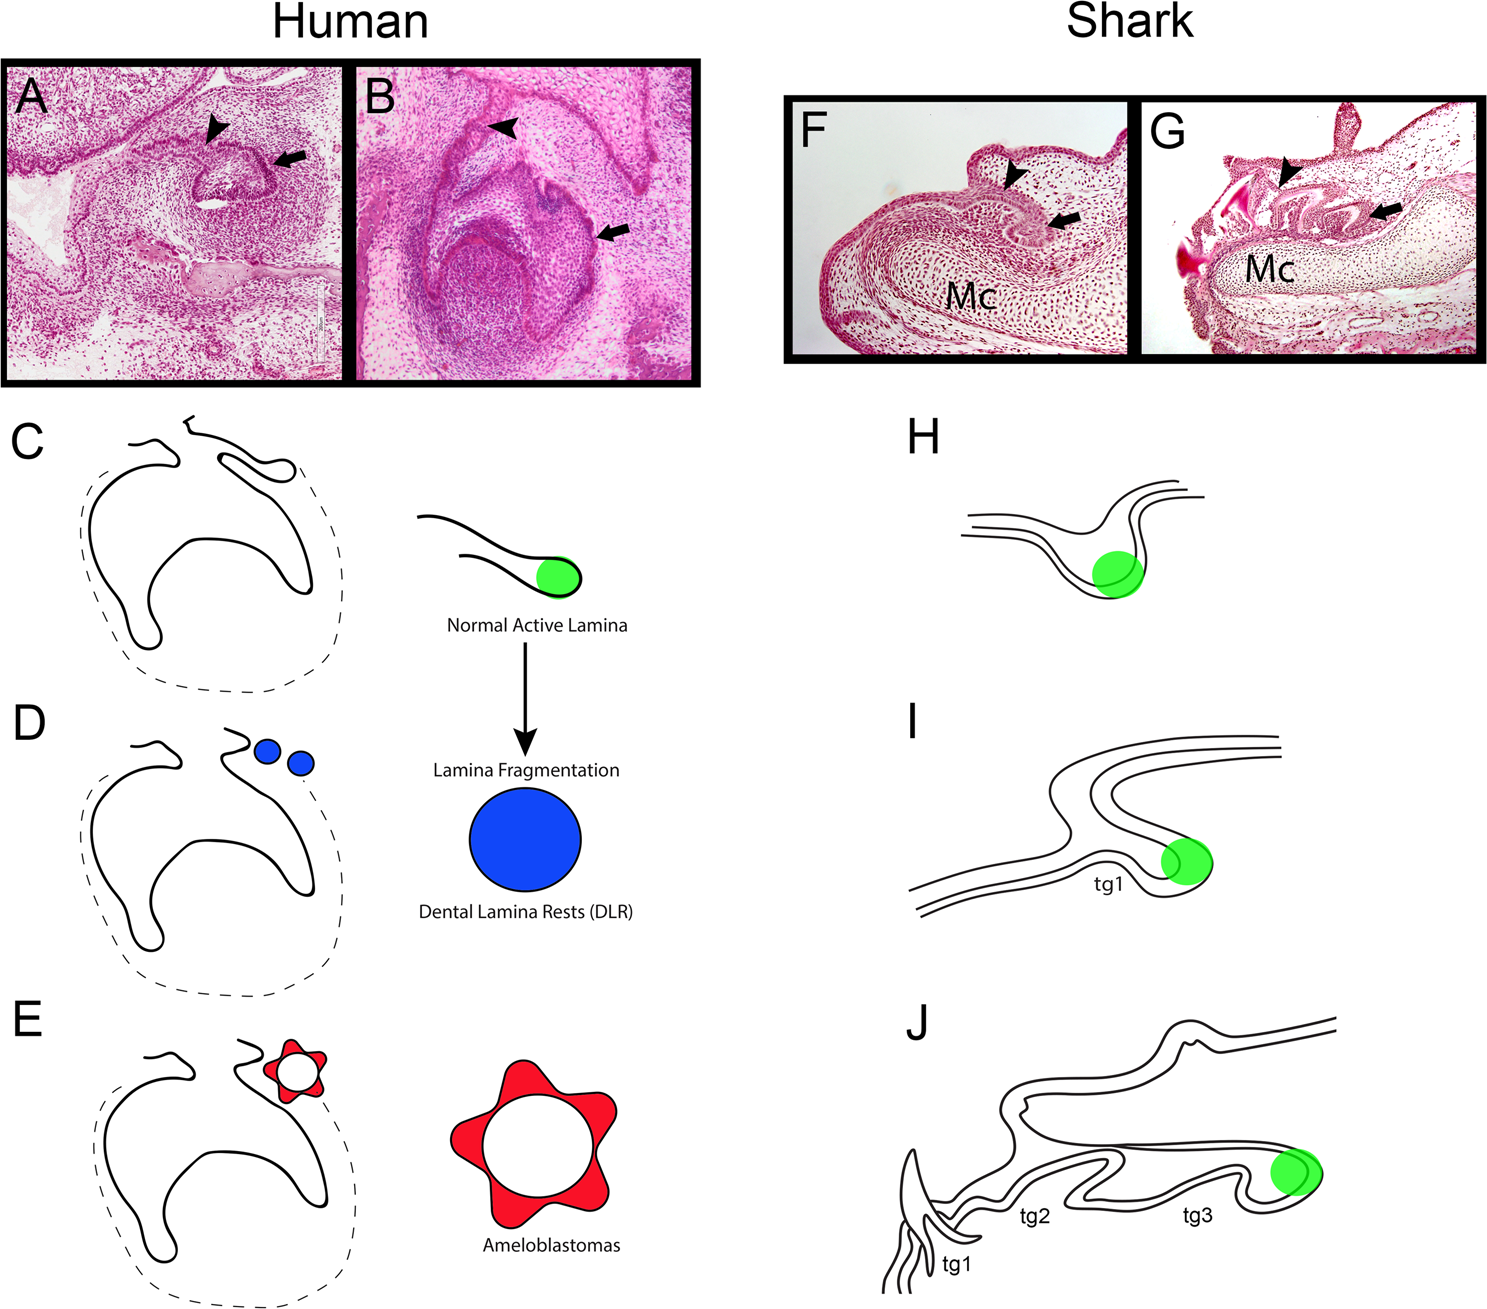 Shark tooth regeneration reveals common stem cell characters in both human  rested lamina and ameloblastoma | Scientific Reports